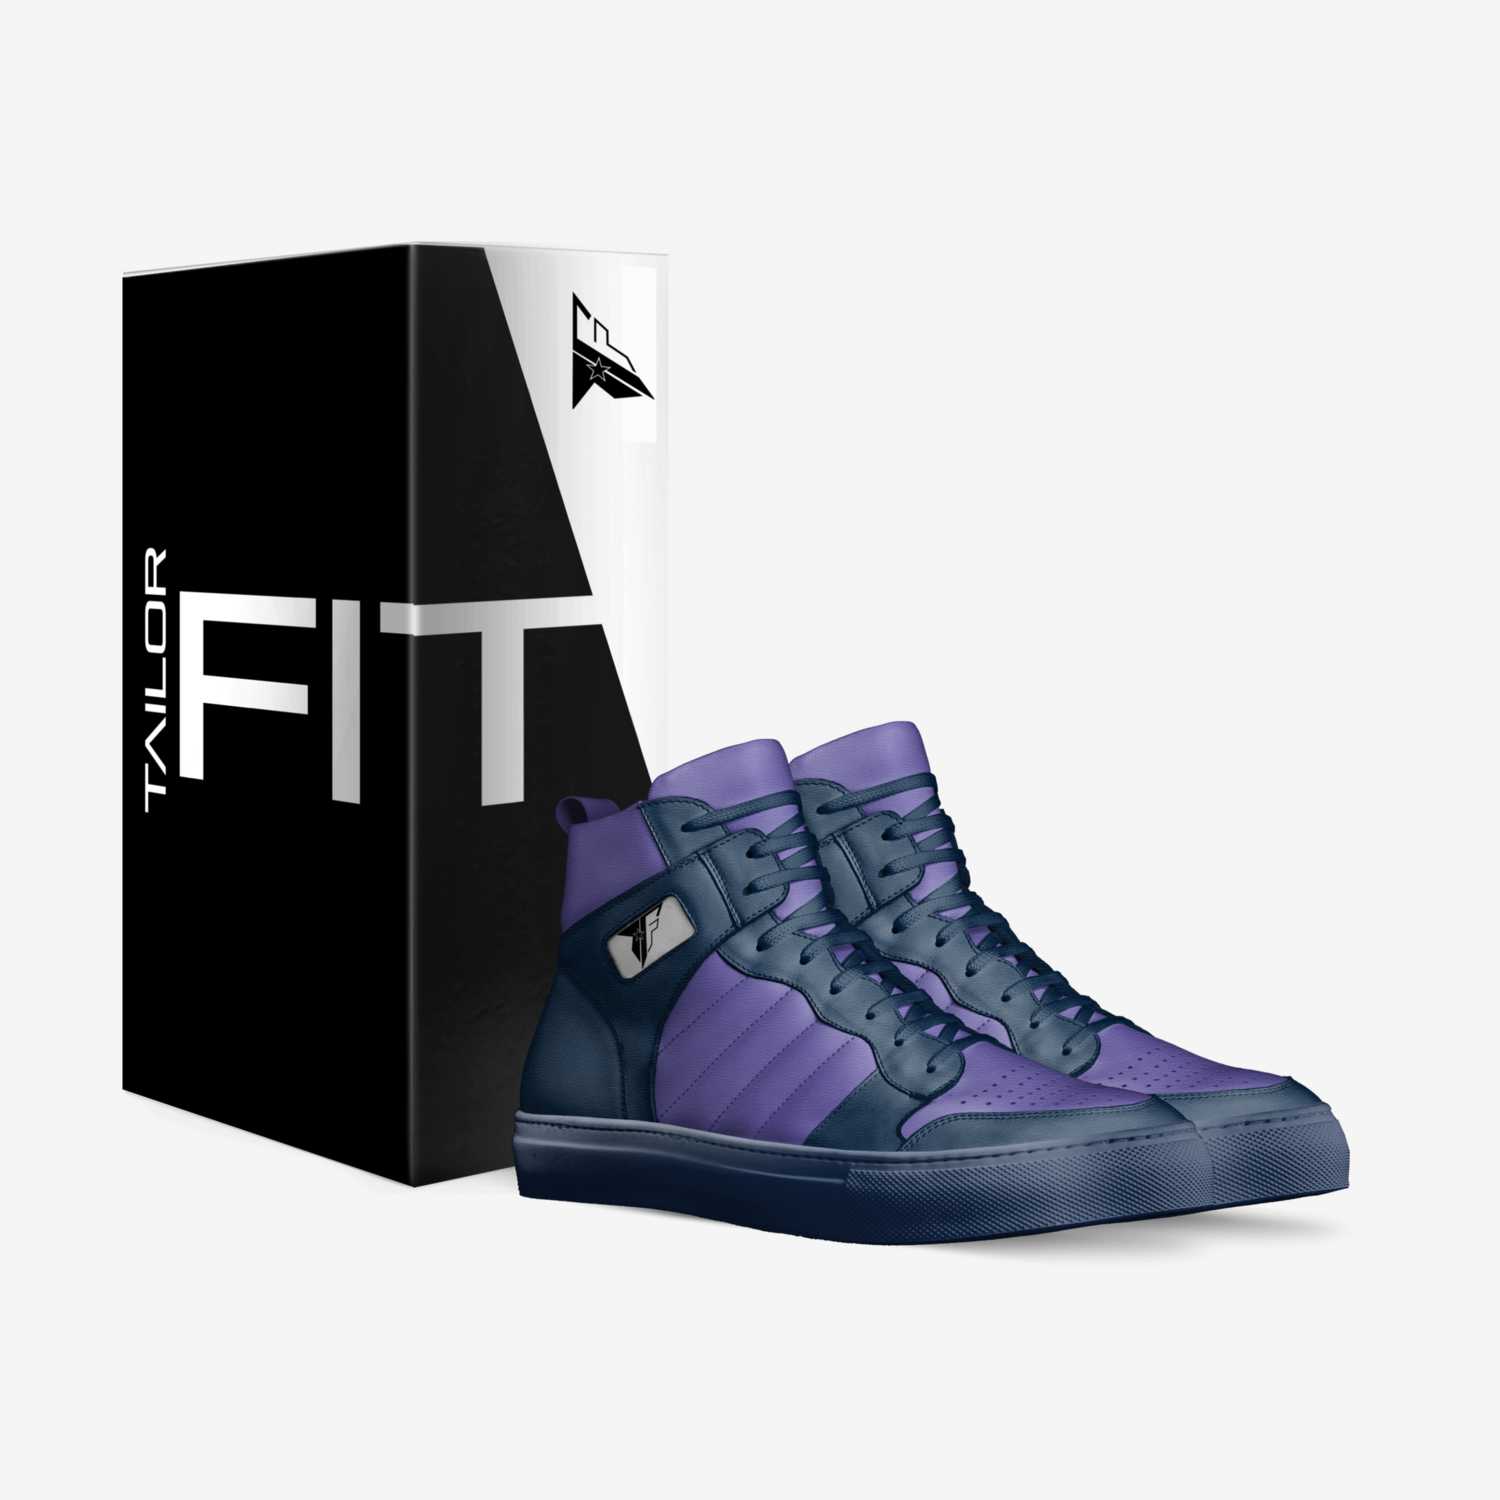 TAILOR FIT custom made in Italy shoes by Talor Fiit | Box view